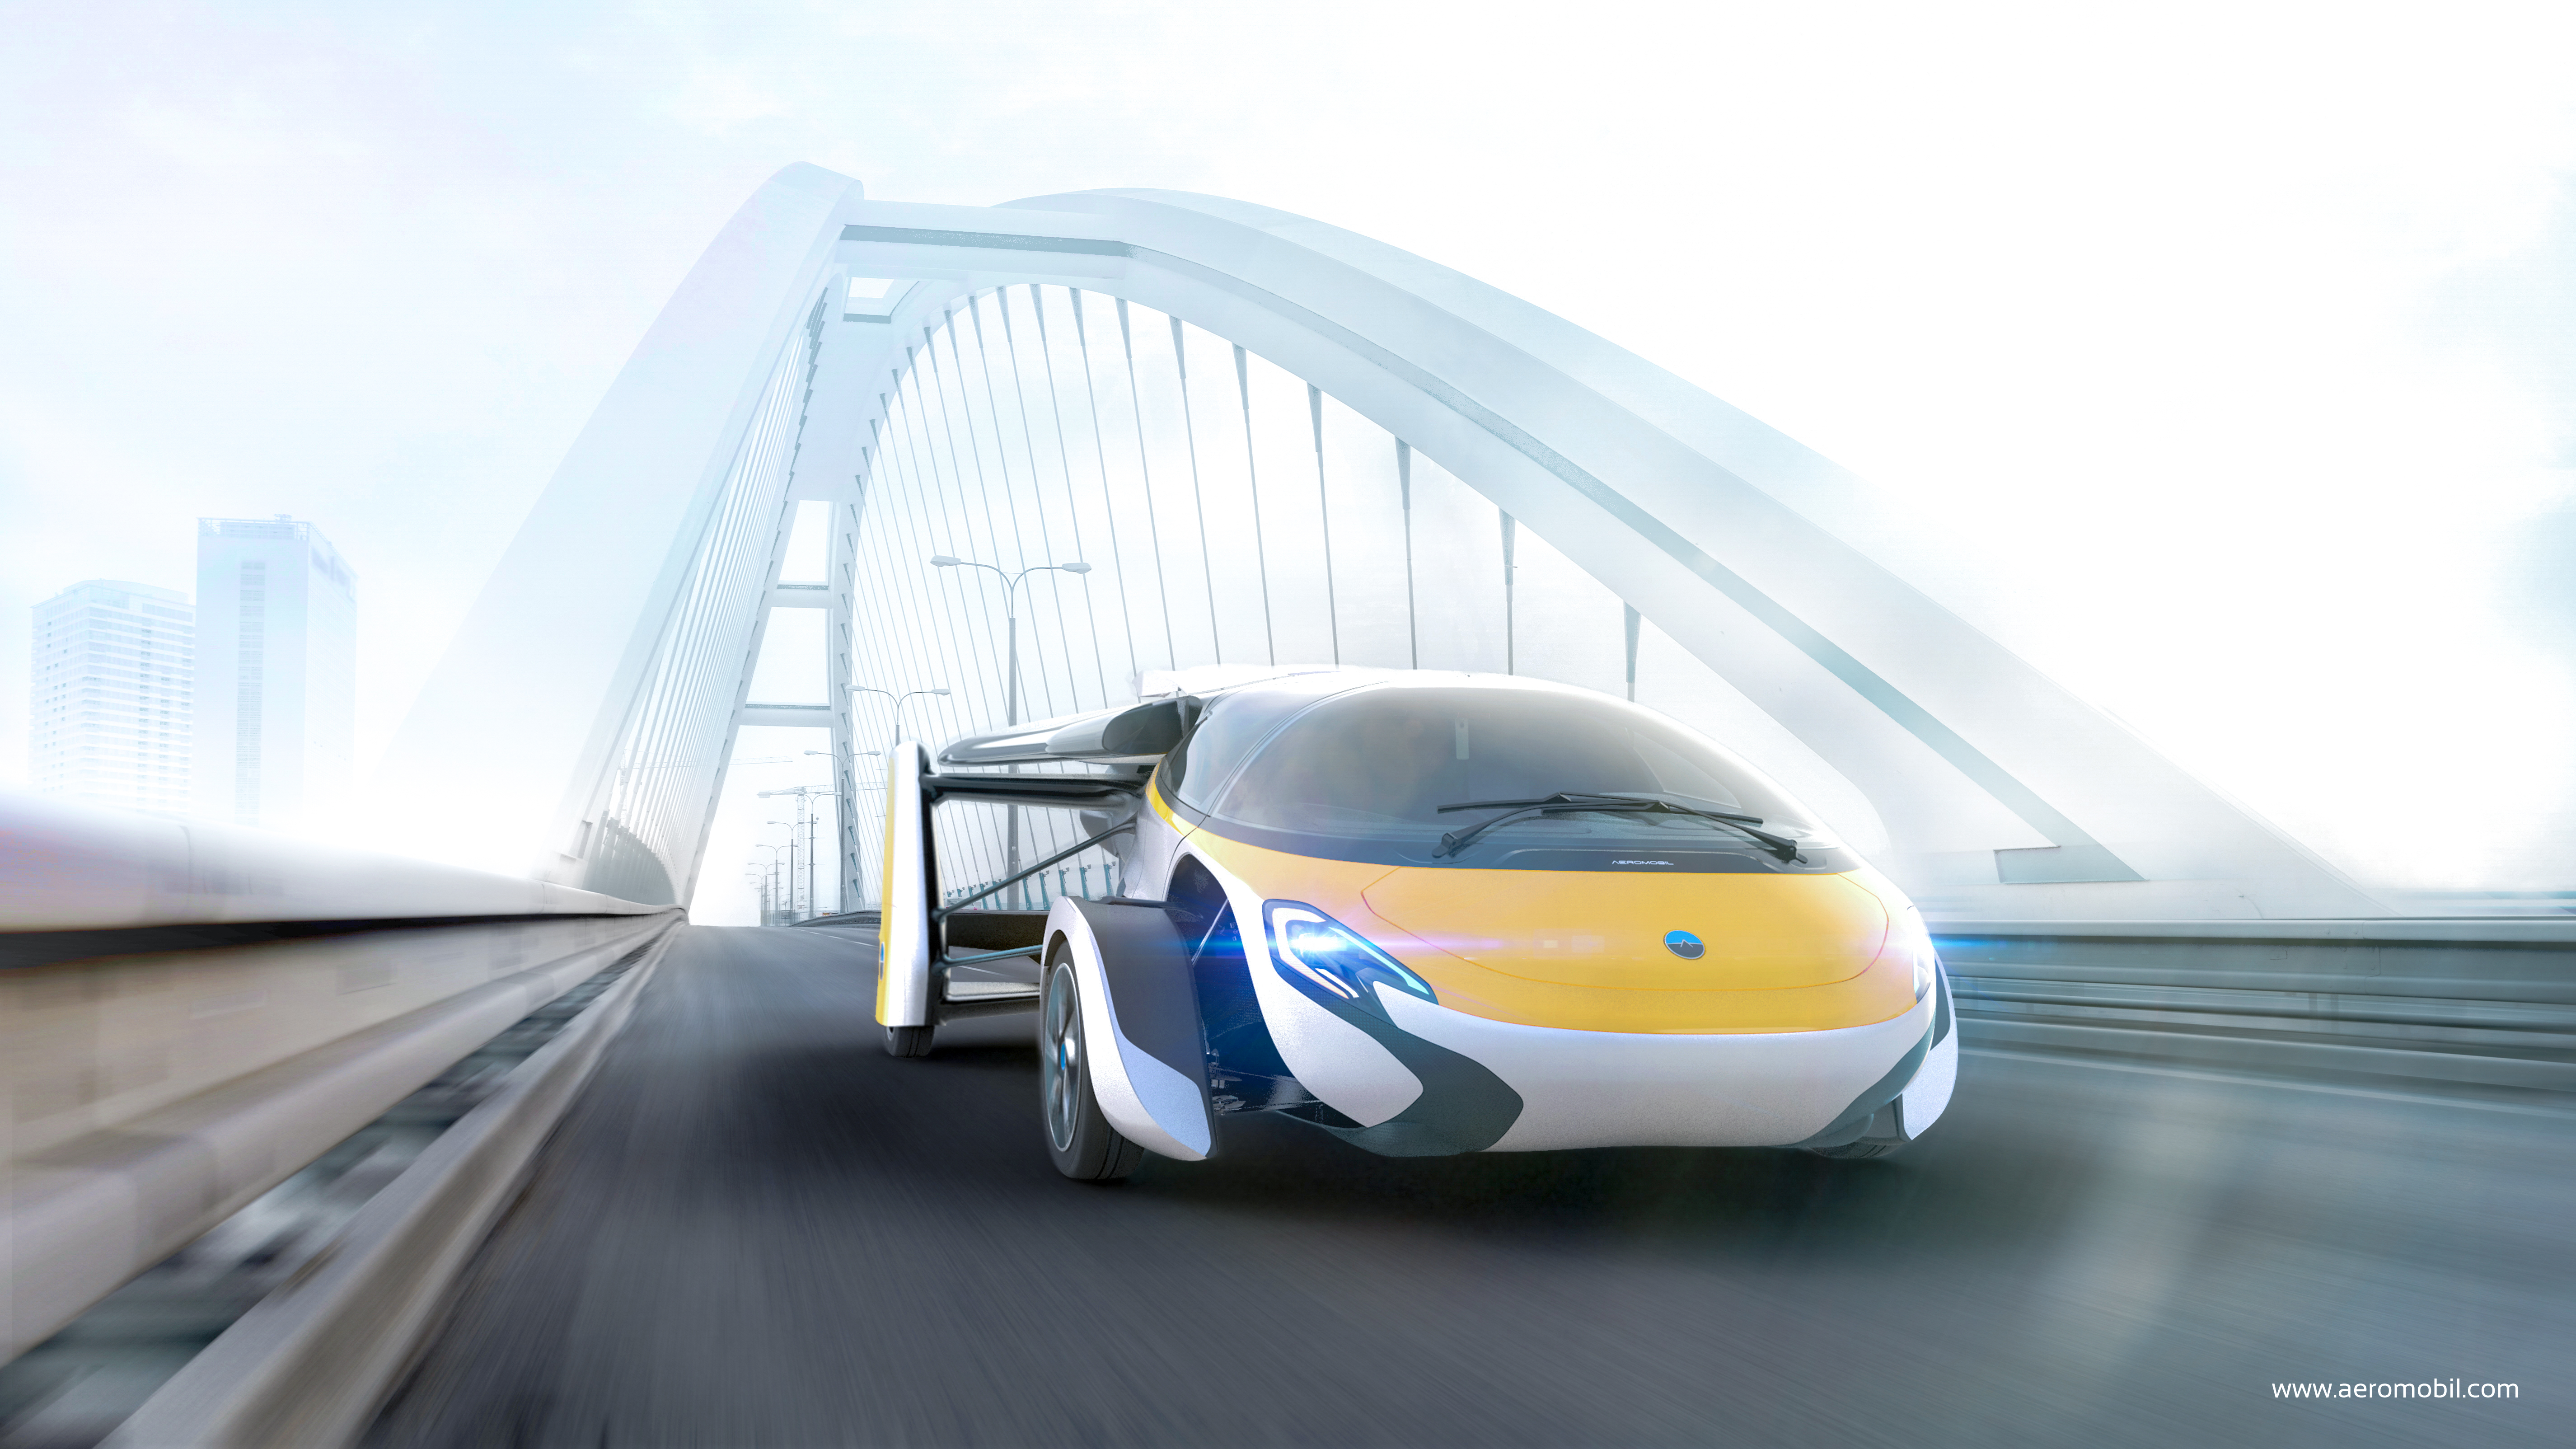 AeroMobil starts taking pre-orders for its 'first edition' flying car | TechCrunch